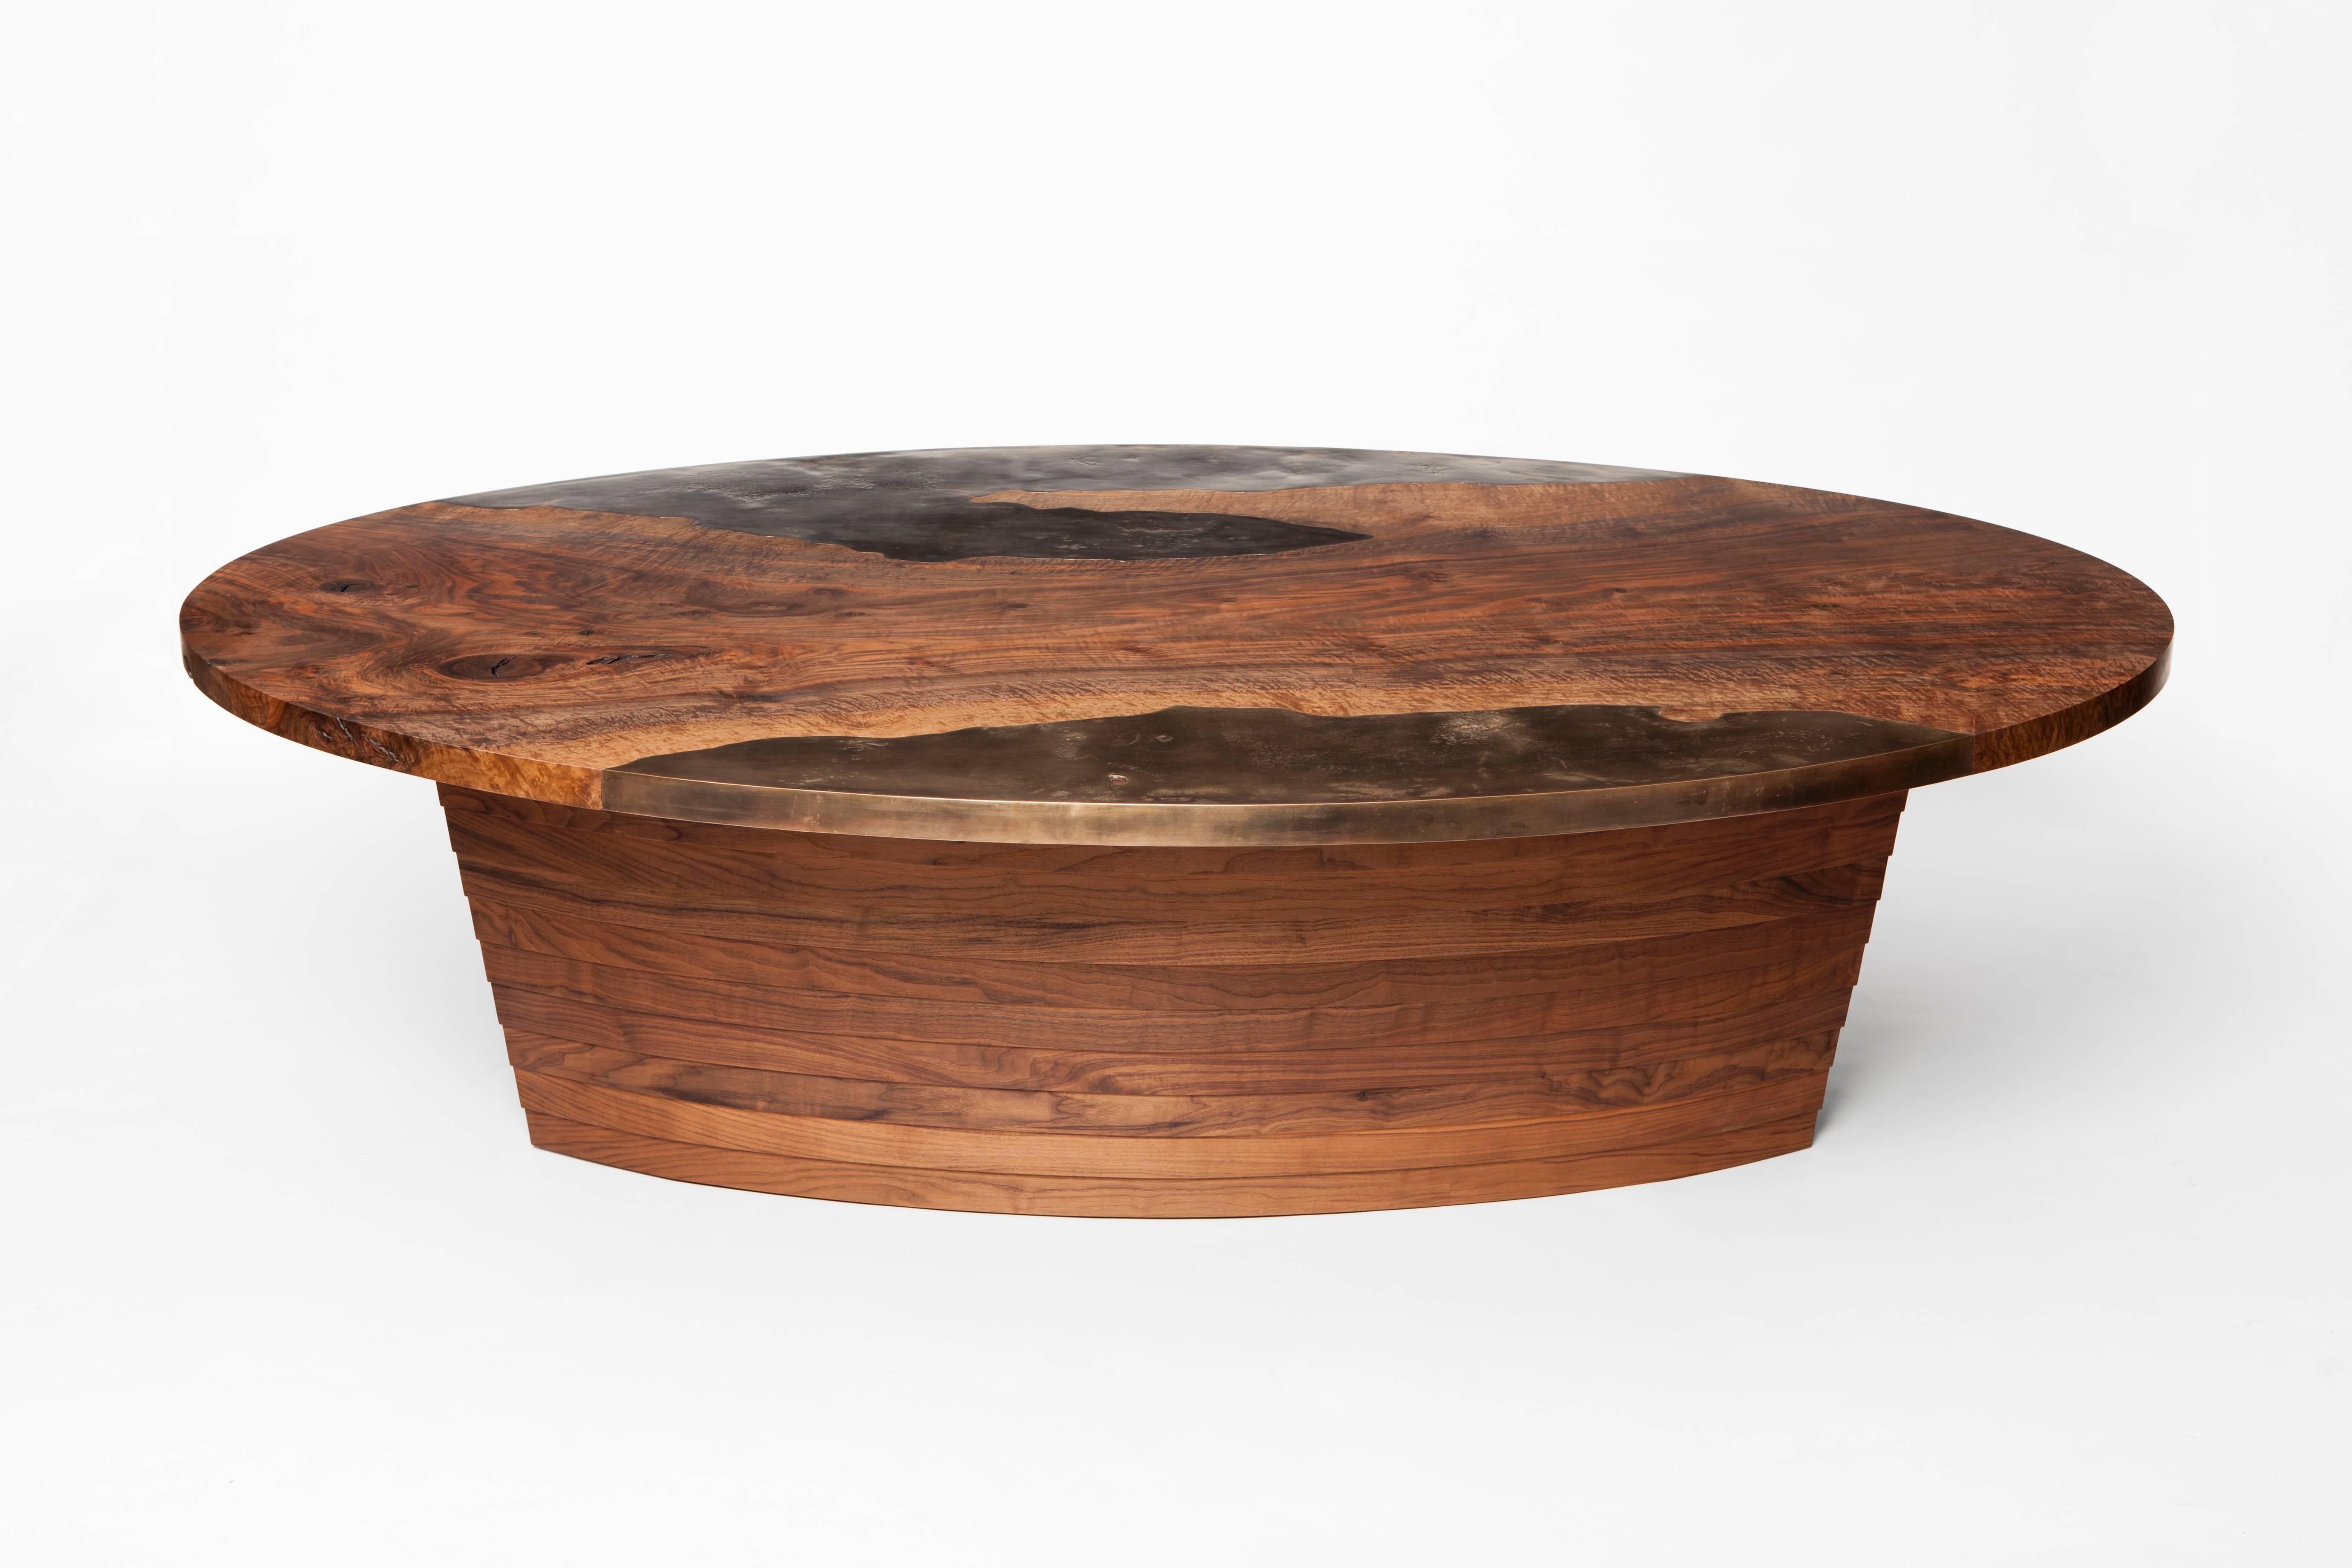 Handcrafted in Northern California, the Pangaea table by Taylor Donsker features two cast bronze edges seamlessly integrated into the top of a slab of highly figured Bastogne Walnut, resting upon a steam bent and curved solid Walnut shiplapped base.